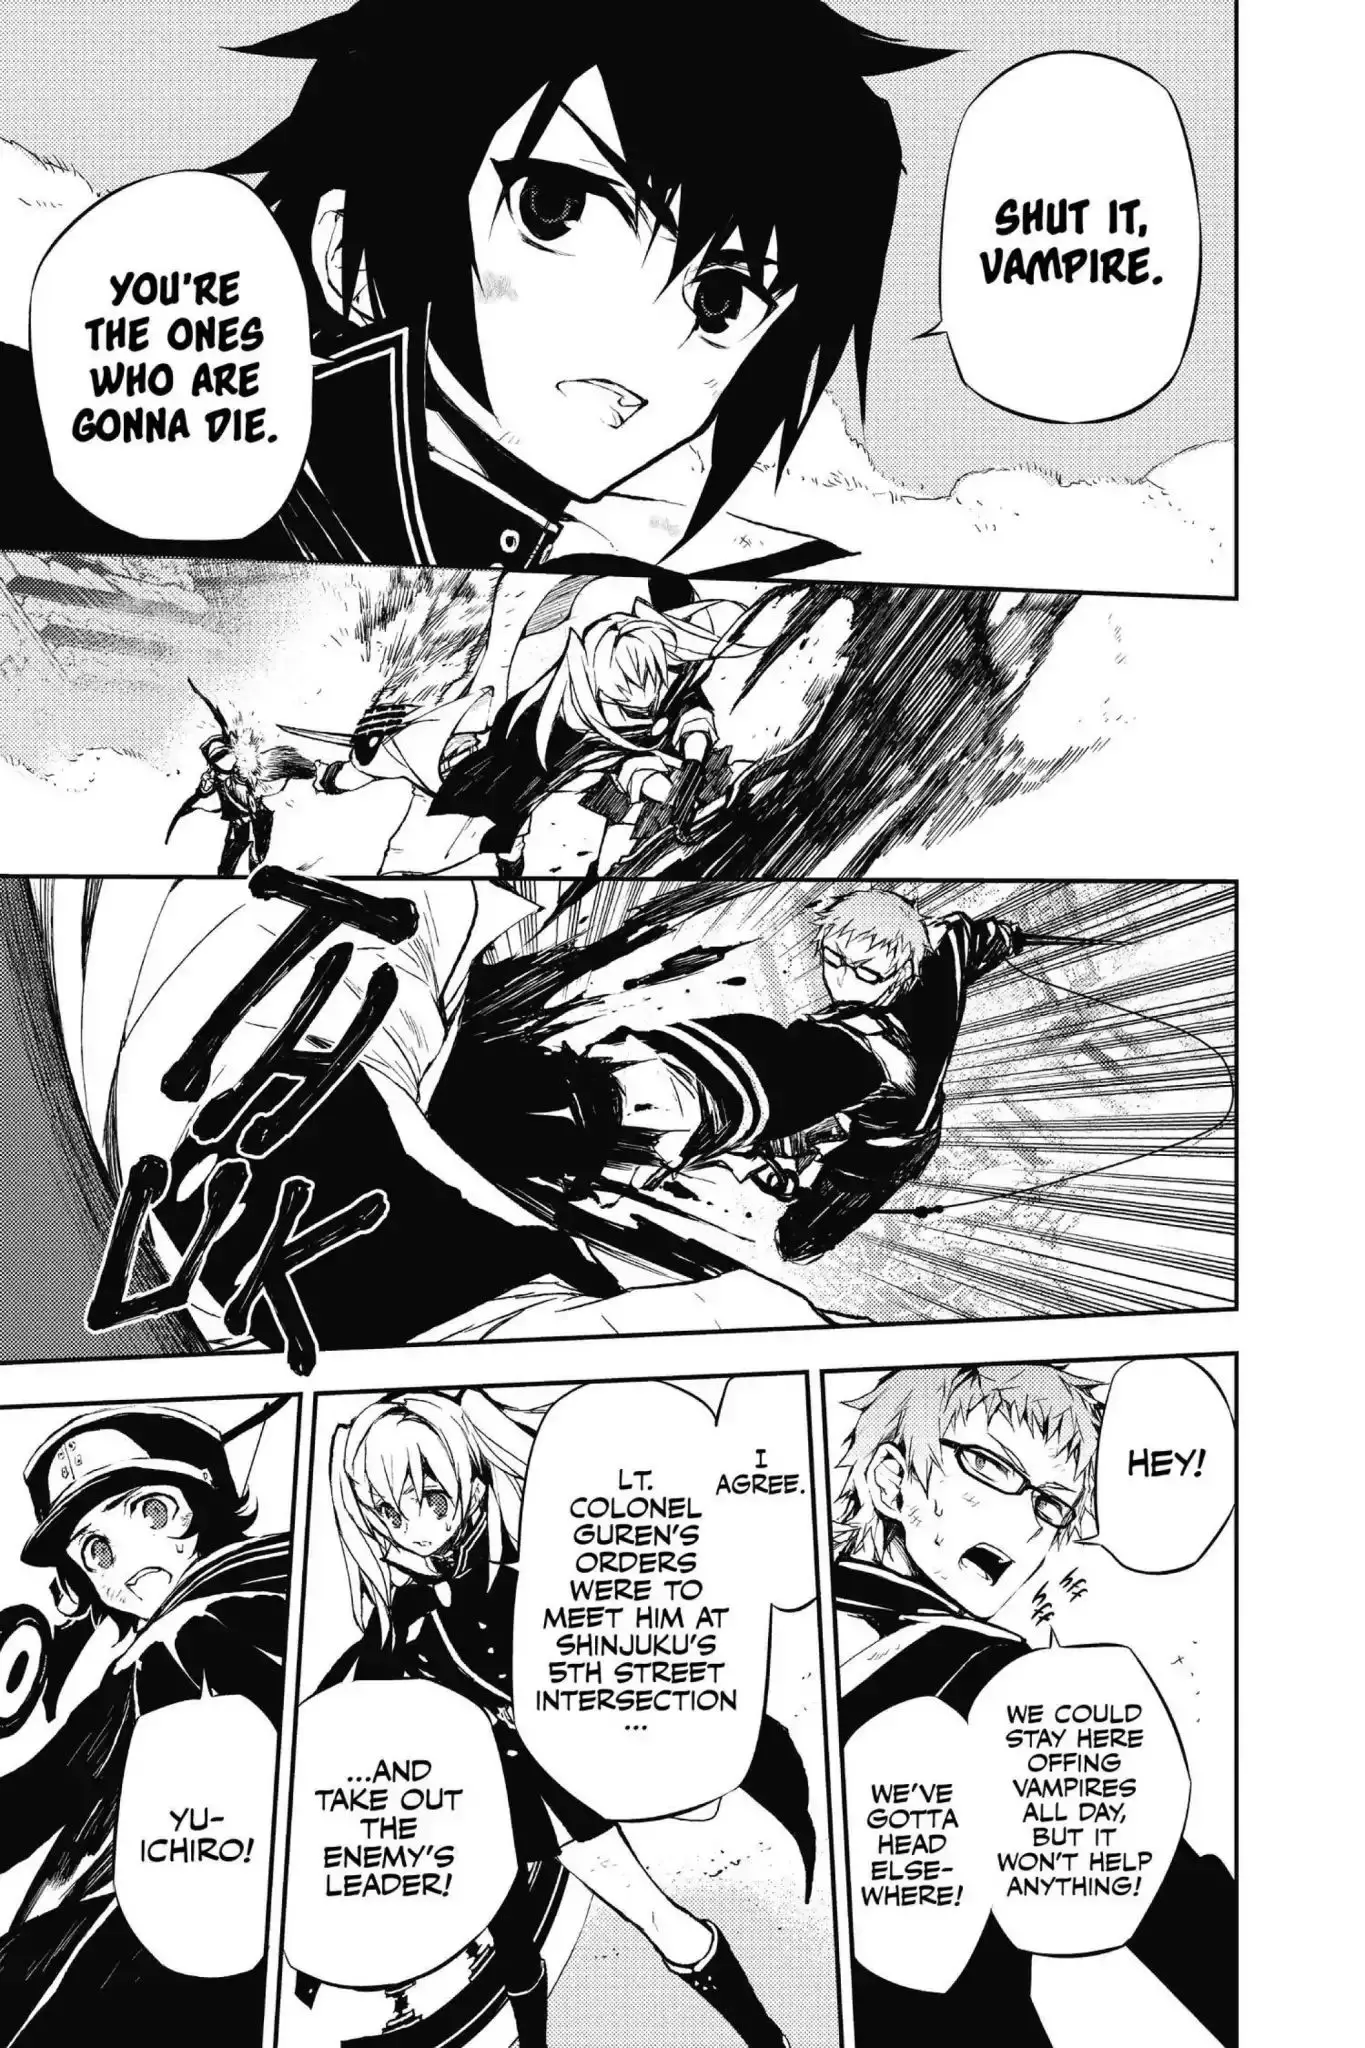 Seraph Of The End - 12 page 11-75c3c577